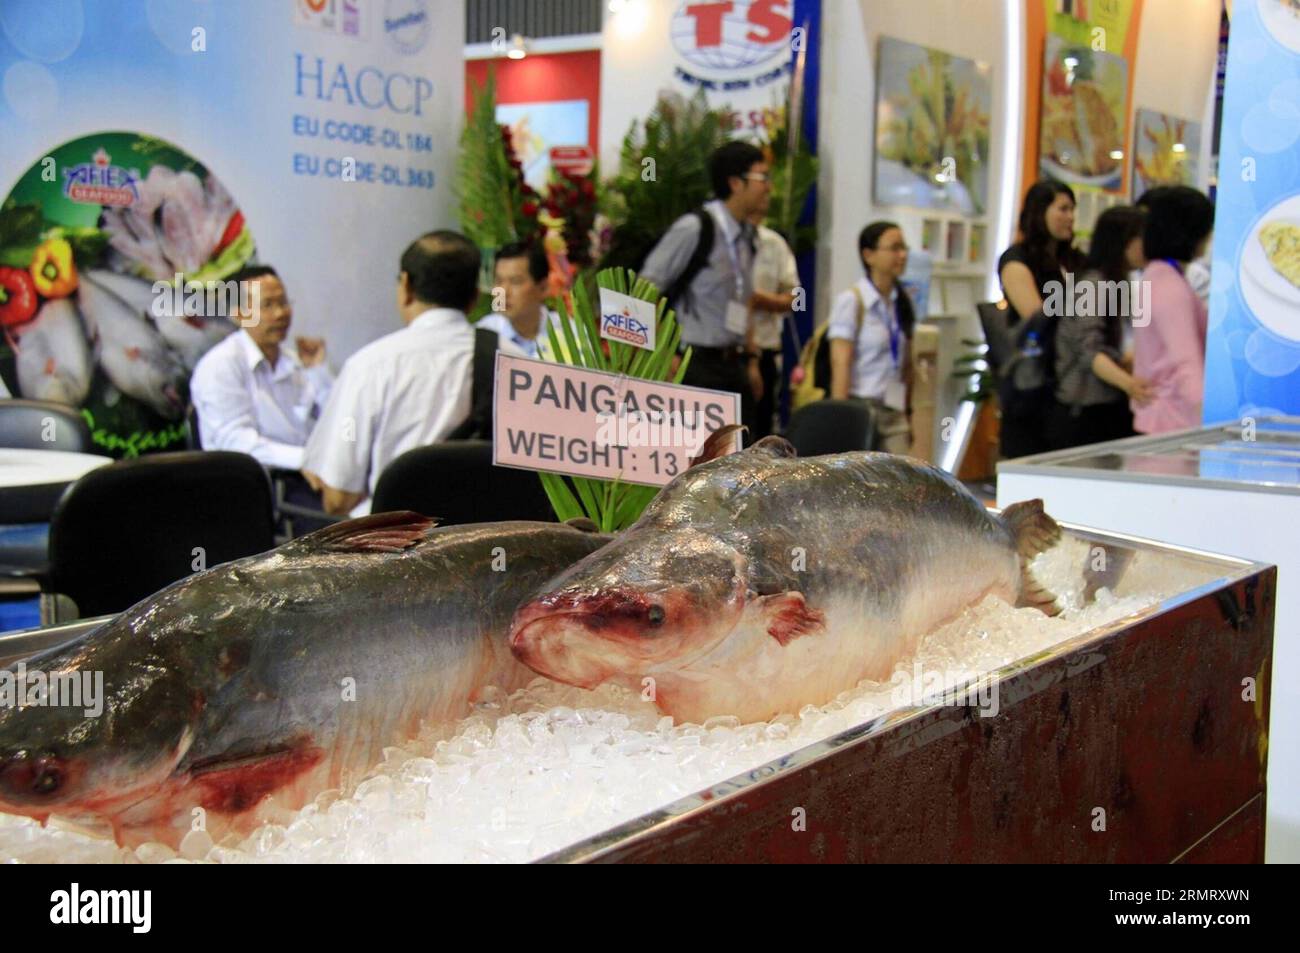 (140806) -- HO CHI MINH CITY, Aug. 6 -- An exhibitor displays pangasius fish during the 2014 Vietnam Fisheries International Exhibition in Ho Chi Minh city, Vietnam, Aug. 6, 2014. The exhibition runs from Aug. 6 to 8 at Saigon Exhibition Convention Center (SECC) in Ho Chi Minh city, Vietnam. ) VIETNAM-HO CHI MINH CITY-FISHERIES EXHIBITION NguyenxLexHuyen PUBLICATIONxNOTxINxCHN   Ho Chi Minh City Aug 6 to exhibitor Displays Pangasius Fish during The 2014 Vietnam Fisheries International Exhibition in Ho Chi Minh City Vietnam Aug 6 2014 The Exhibition runs from Aug 6 to 8 AT Saigon Exhibition Con Stock Photo